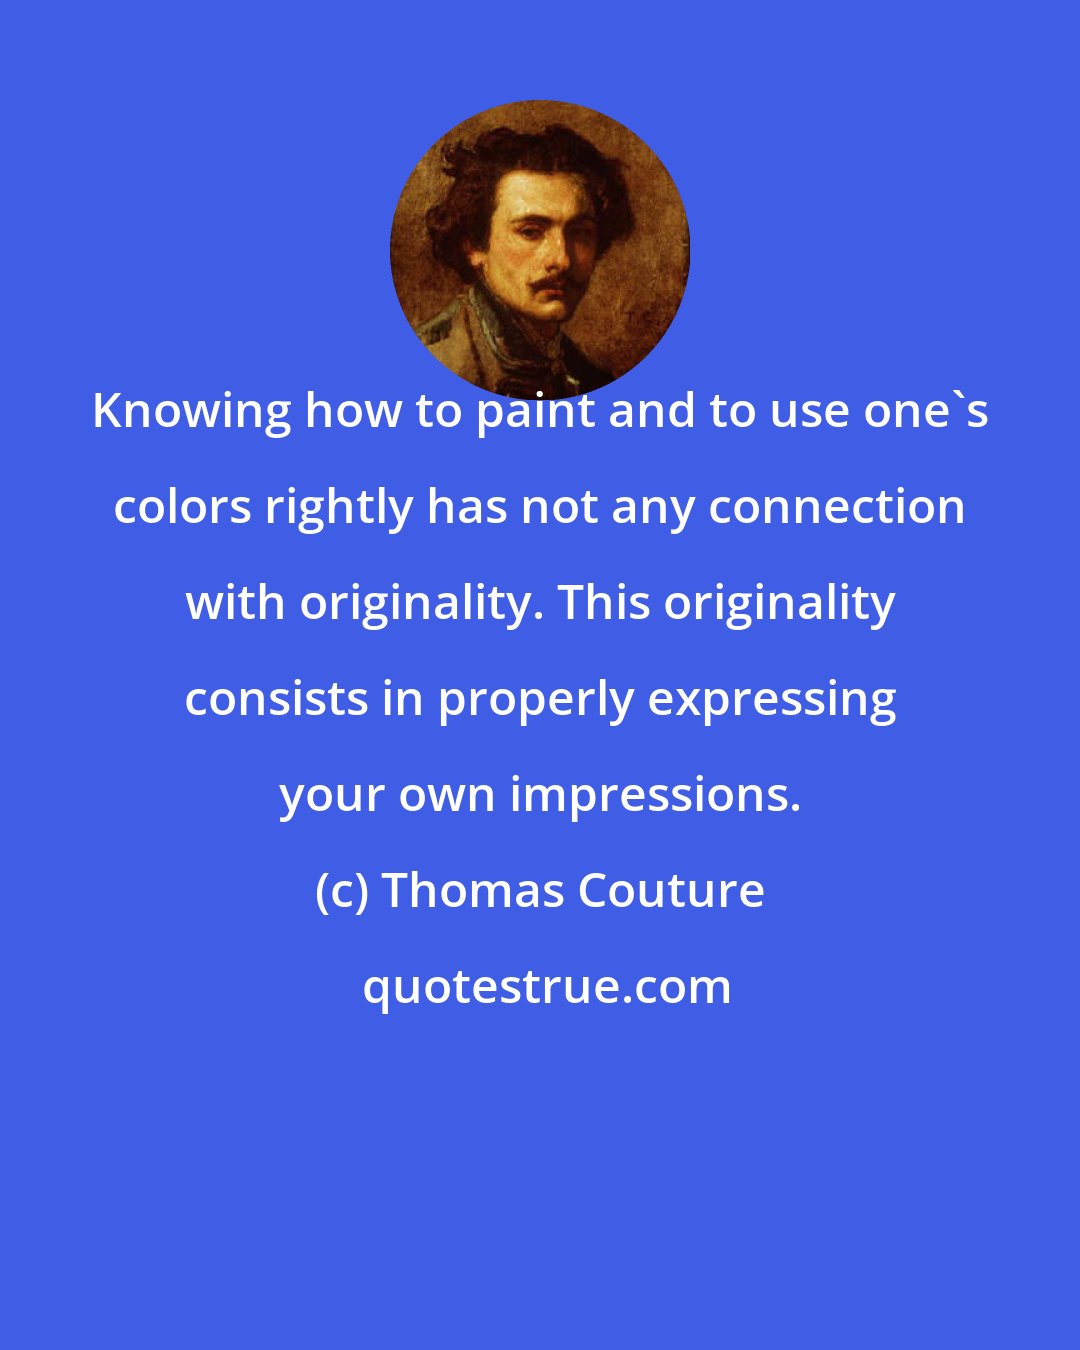 Thomas Couture: Knowing how to paint and to use one's colors rightly has not any connection with originality. This originality consists in properly expressing your own impressions.